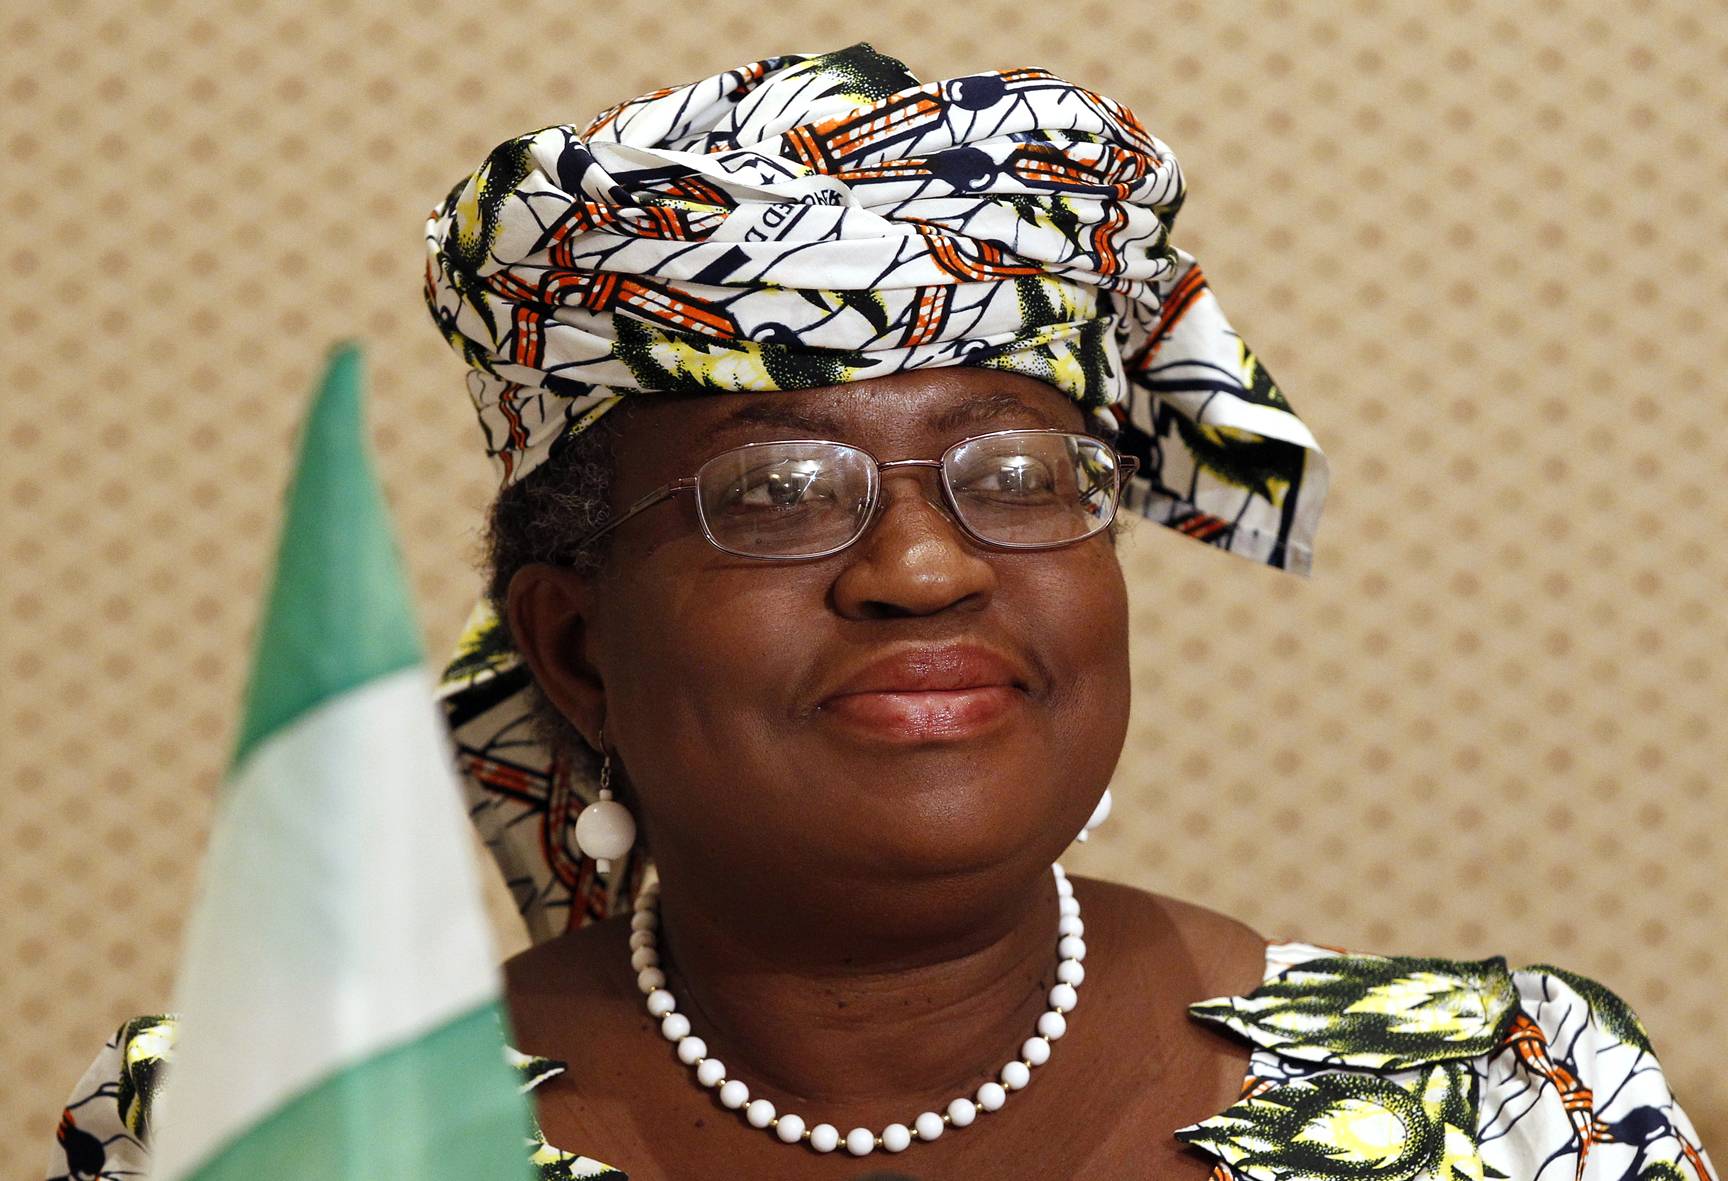 Demand for Nigerian Head of World Bank Intensifies - Since&nbsp;Nigerian&nbsp;Finance Minister&nbsp;Ngozi Okonjo-Iweala&nbsp;was&nbsp;recommended for the top post&nbsp;at the World Bank by a handful of African nations just weeks ago, a growing chorus of&nbsp;supporters in favor of her candidacy&nbsp;has grown around the world as many hope public consensus will help the seasoned finance veteran snag the job.(Photo: REUTERS/Siphiwe Sibeko)